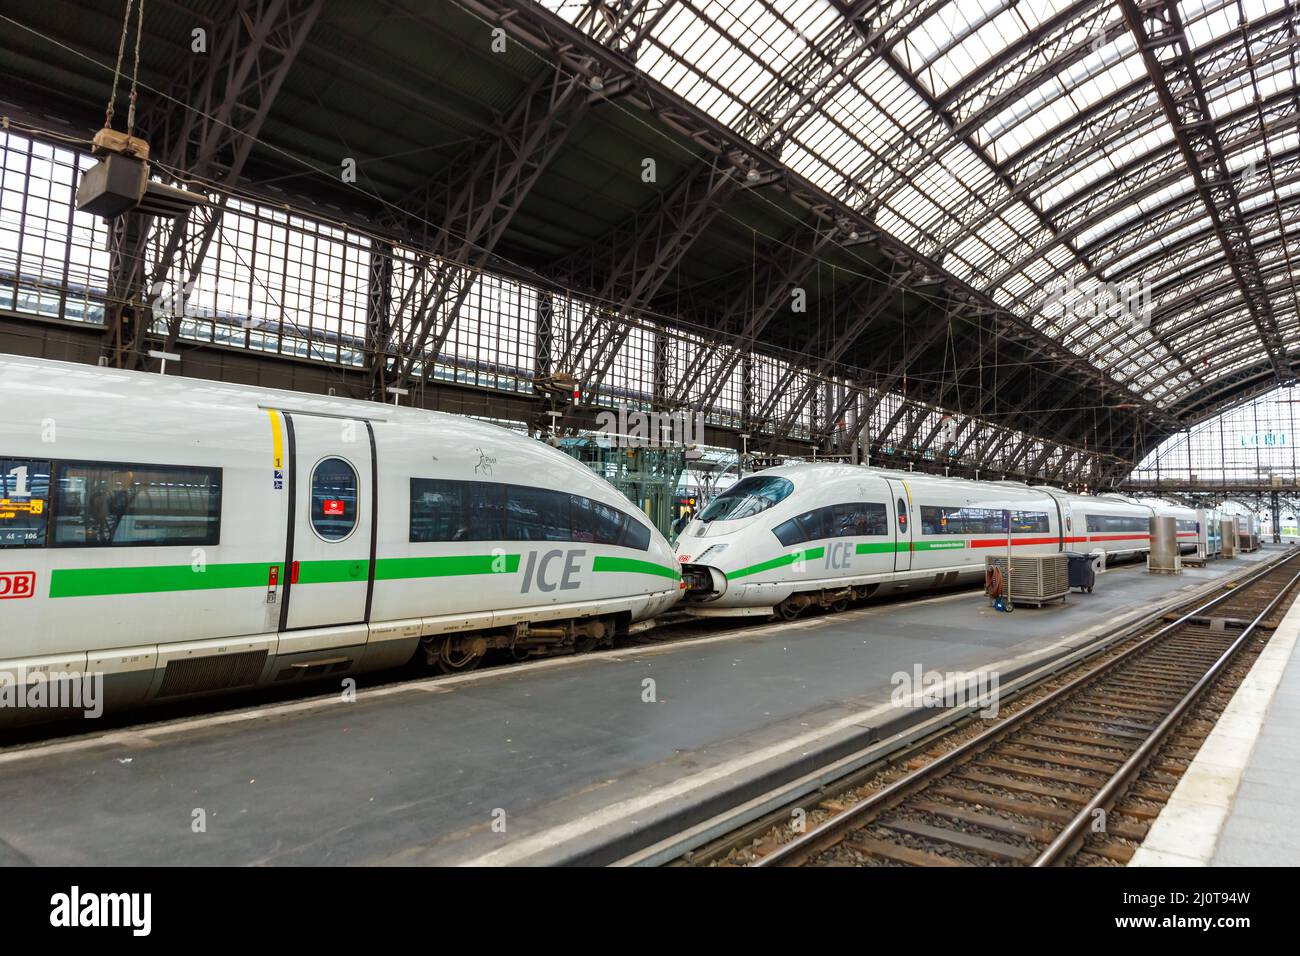 ICE 3 train in Cologne main station Hbf in Germany Stock Photo